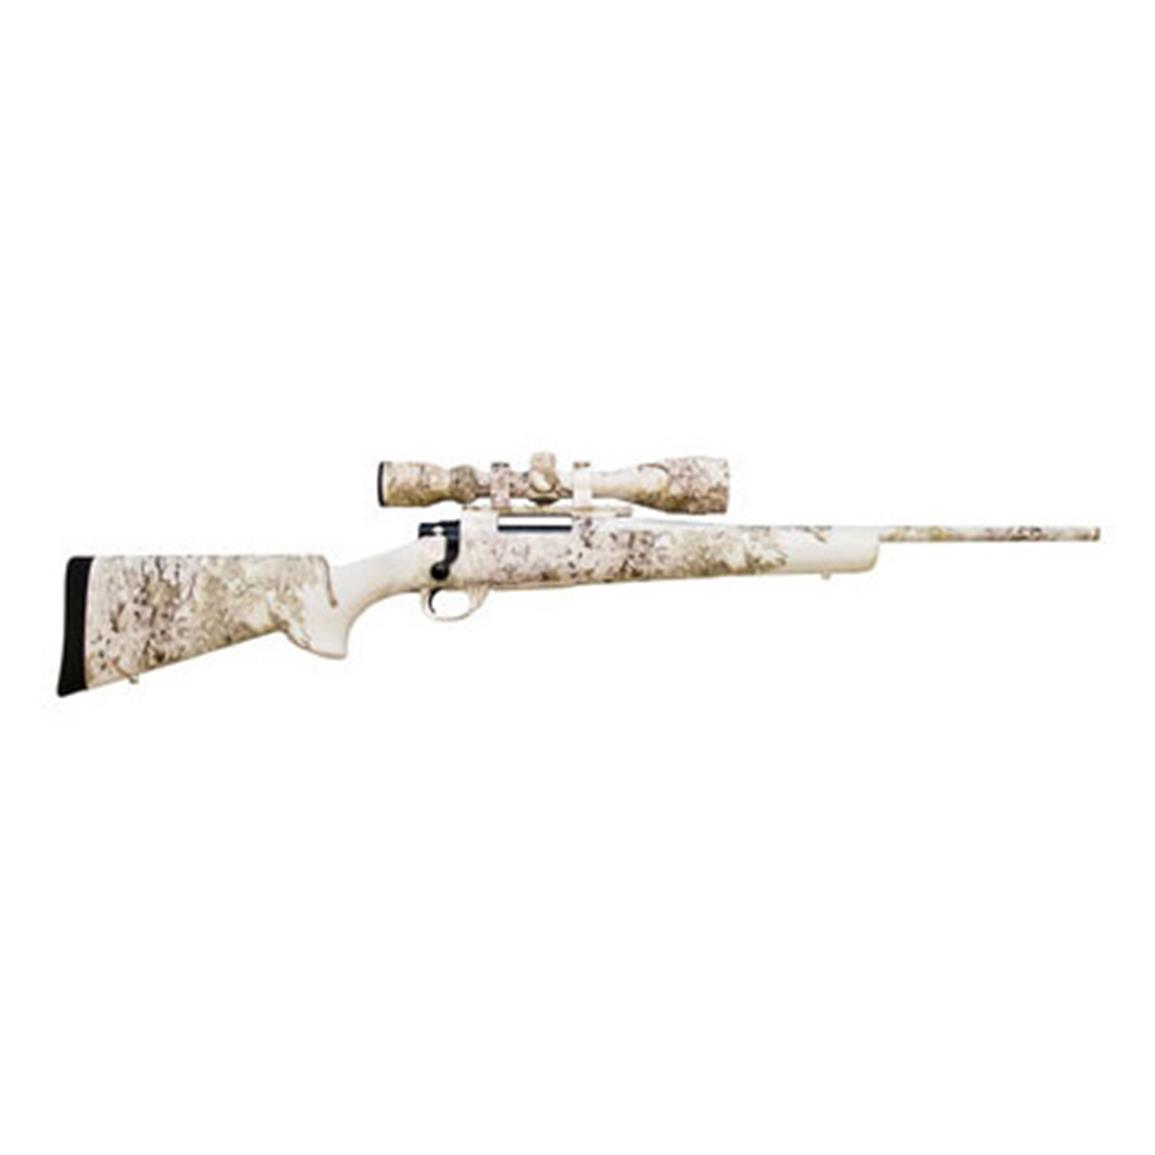 LSI Howa Hogue Snowking Package, Bolt Action, .308 Win., Nikko Stirling 4-16x44mm Scope, 5+1 Rounds